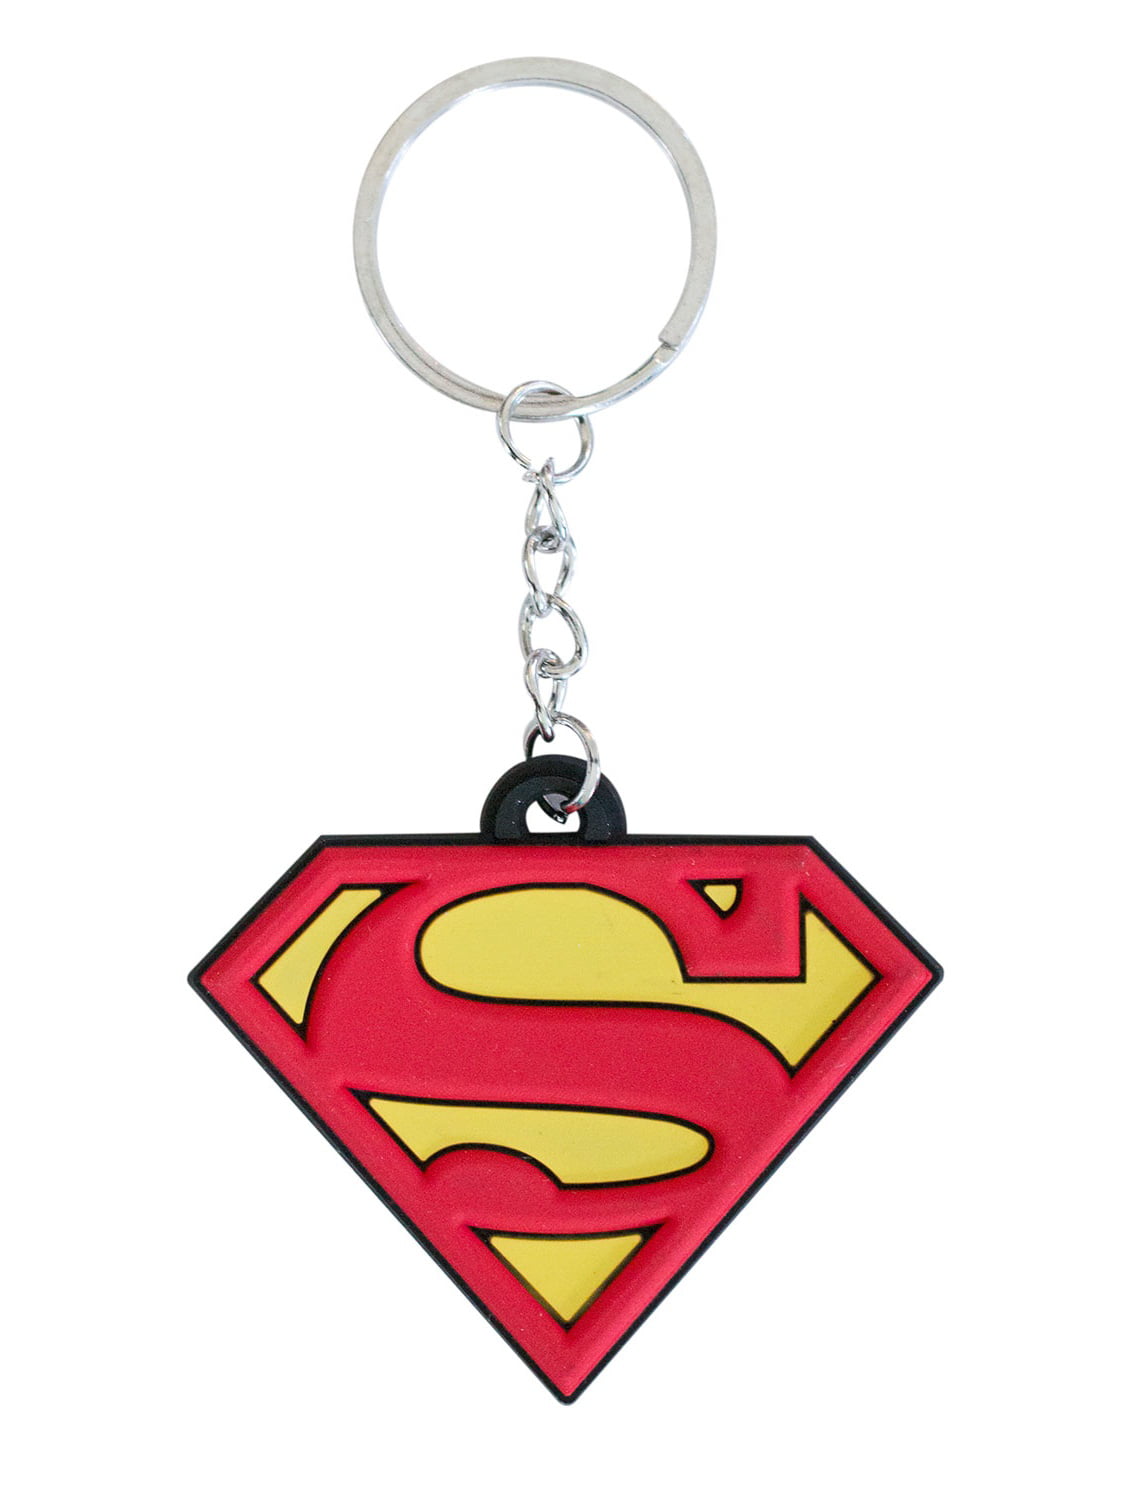 Superman Color Pewter Keychain Key Chain Keyring New 